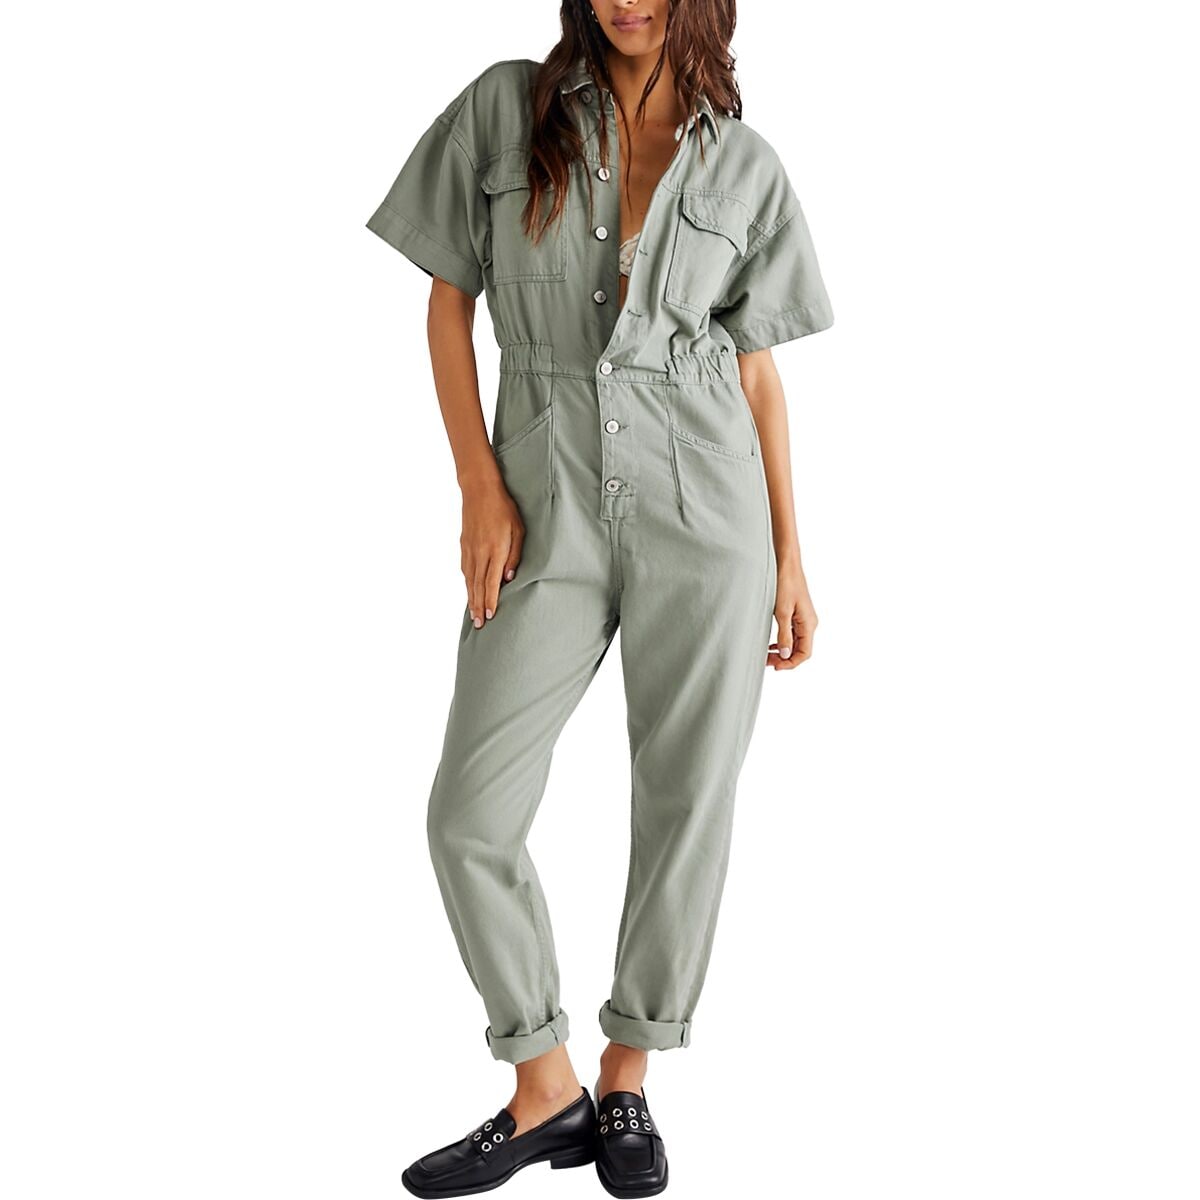 Free People Marci Coverall - Women's